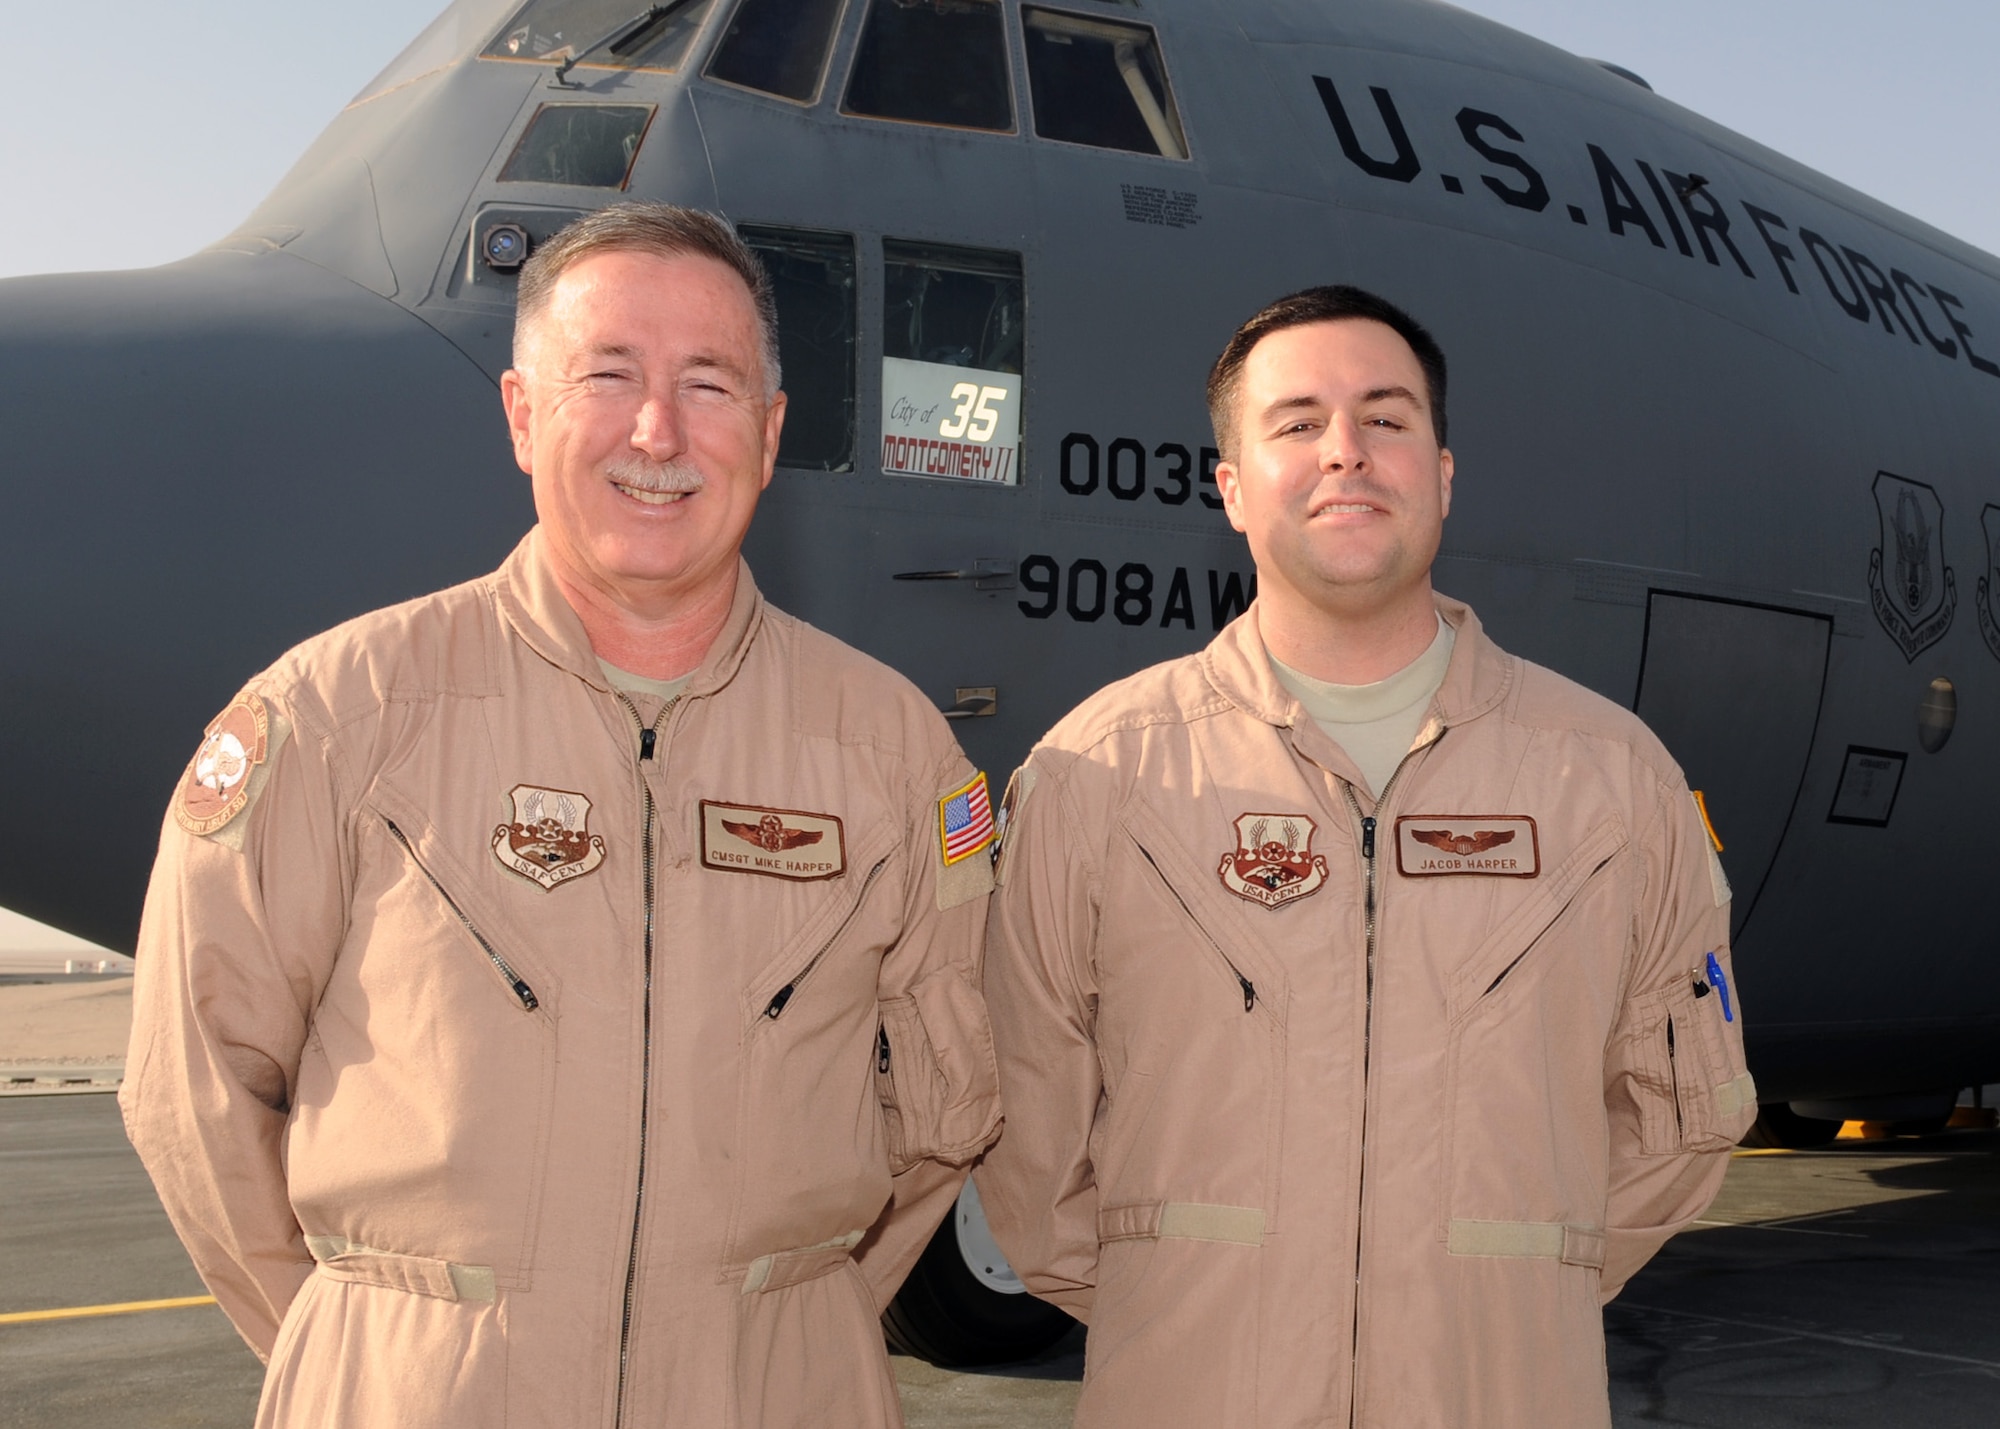 SOUTHWEST ASIA – Chief Master Sgt. Michael E. Harper (left) and his son, Capt. Michael J. Harper, are deployed for the third time together with the 746th Expeditionary Airlift Squadron. This is the chief’s final deployment, as he will retire in August after 36 years. Both Airmen are Reservists deployed from the 908th Airlift Wing at Maxwell Air Force Base Ala. (U.S. Air Force photo/Senior Airman Joel Mease)